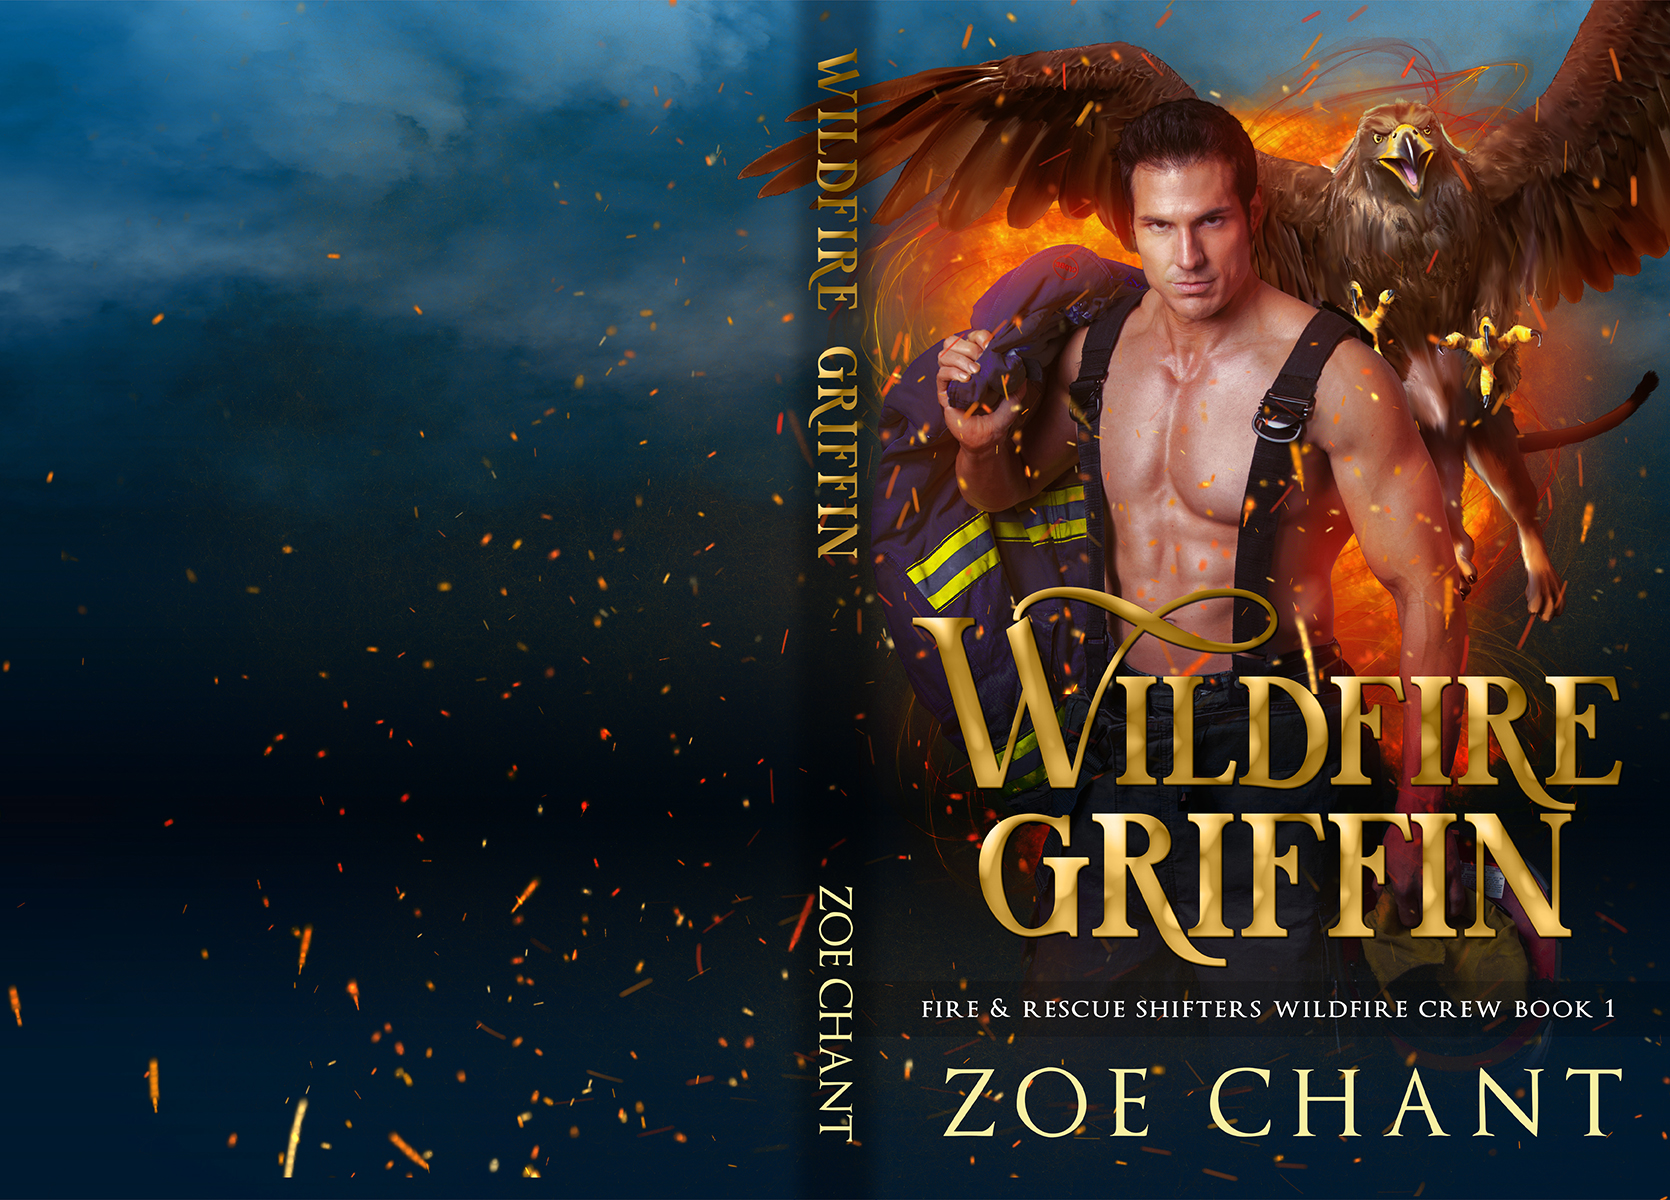 Wildfire Griffin by Zoe Chant. Cover redesign. Paperback.